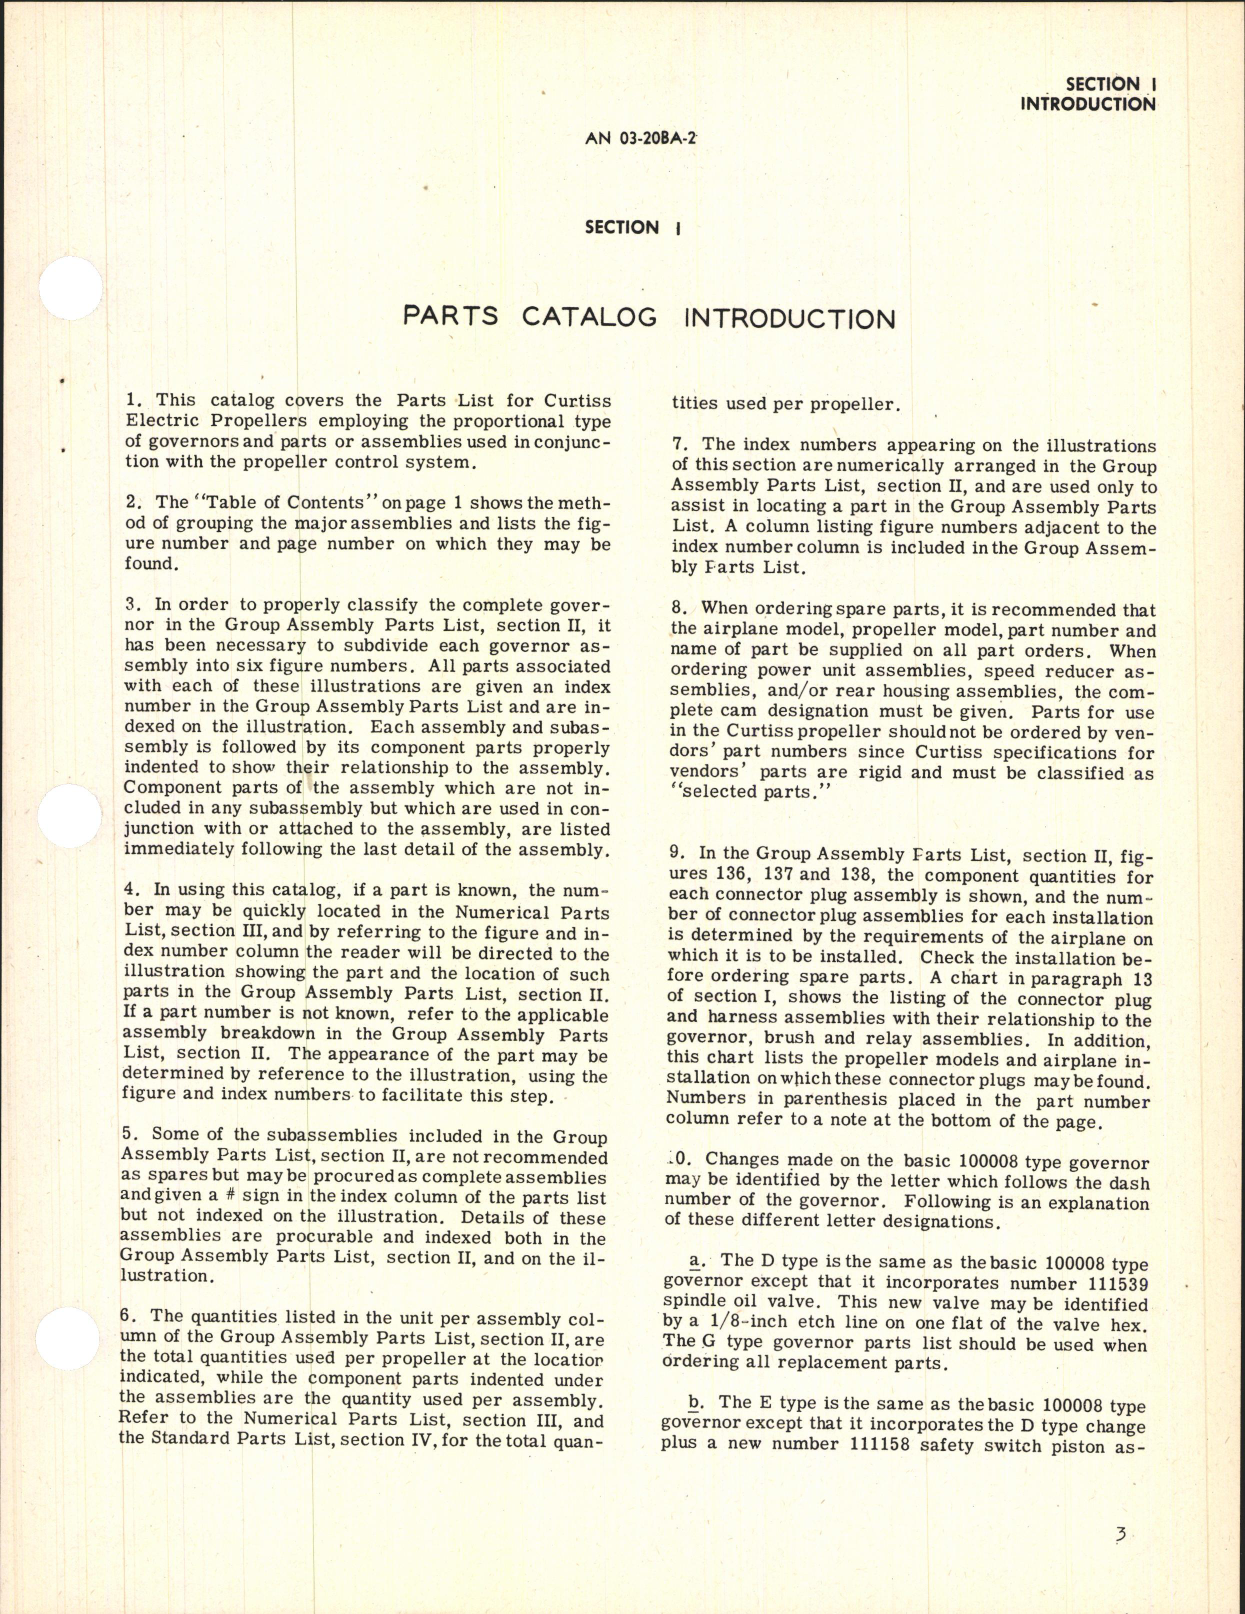 Sample page 5 from AirCorps Library document: Parts Catalog for Electric Propeller Control System